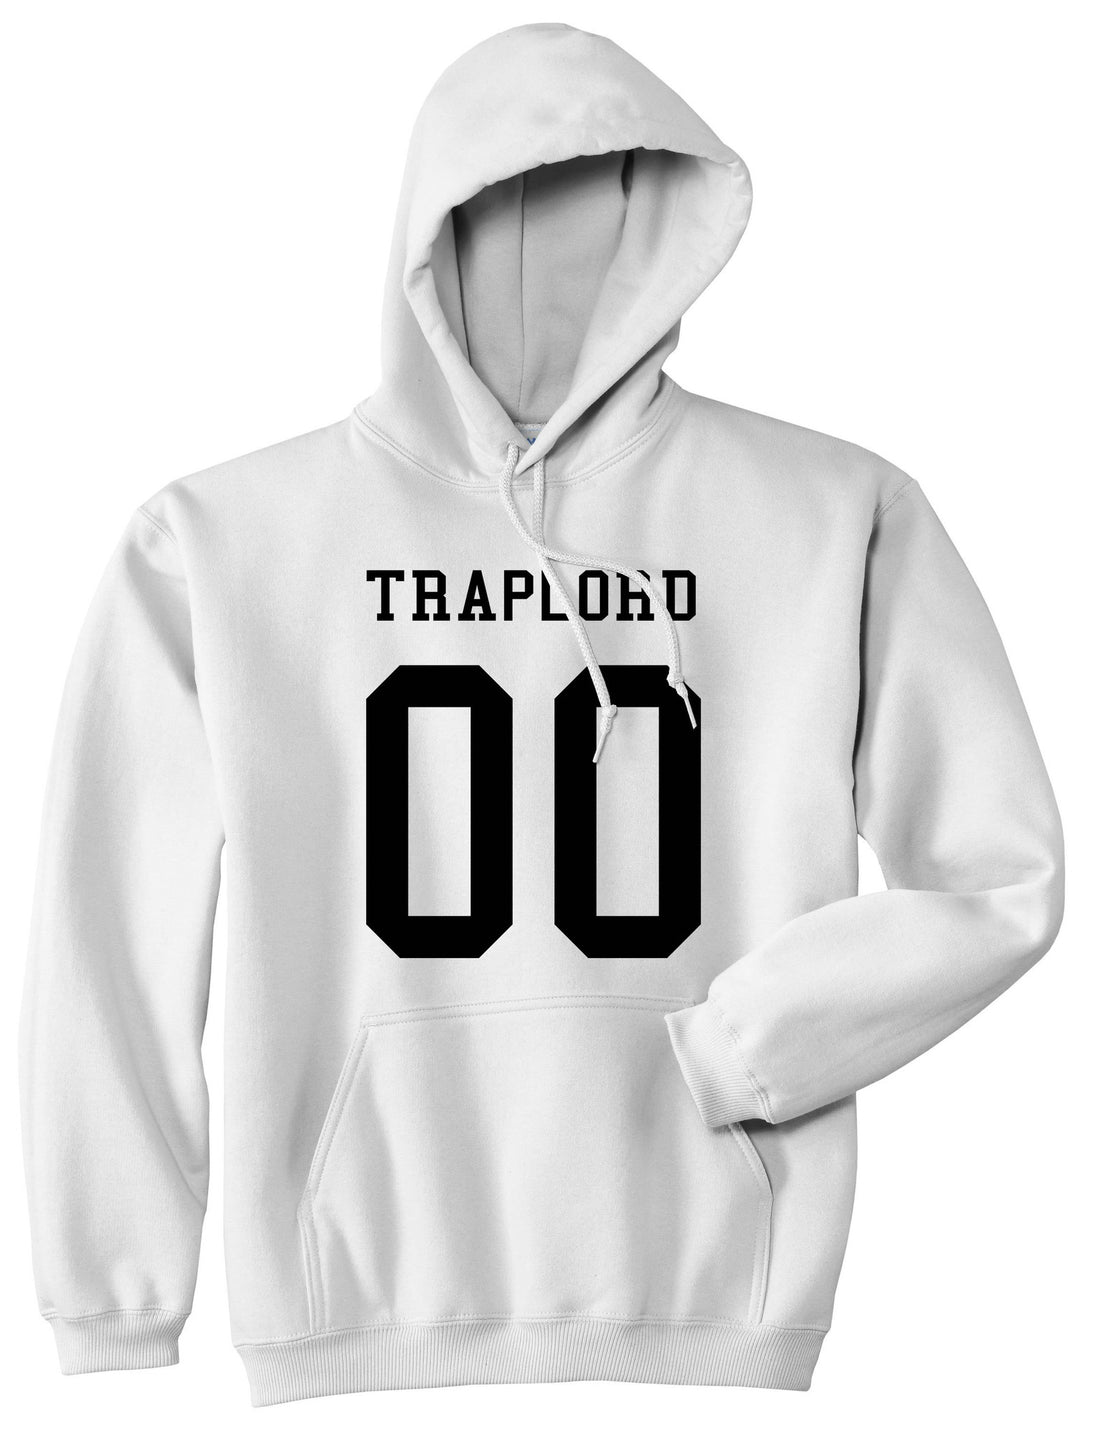 Traplord Team Jersey 00 Trap Lord Boys Kids Pullover Hoodie Hoody in White By Kings Of NY